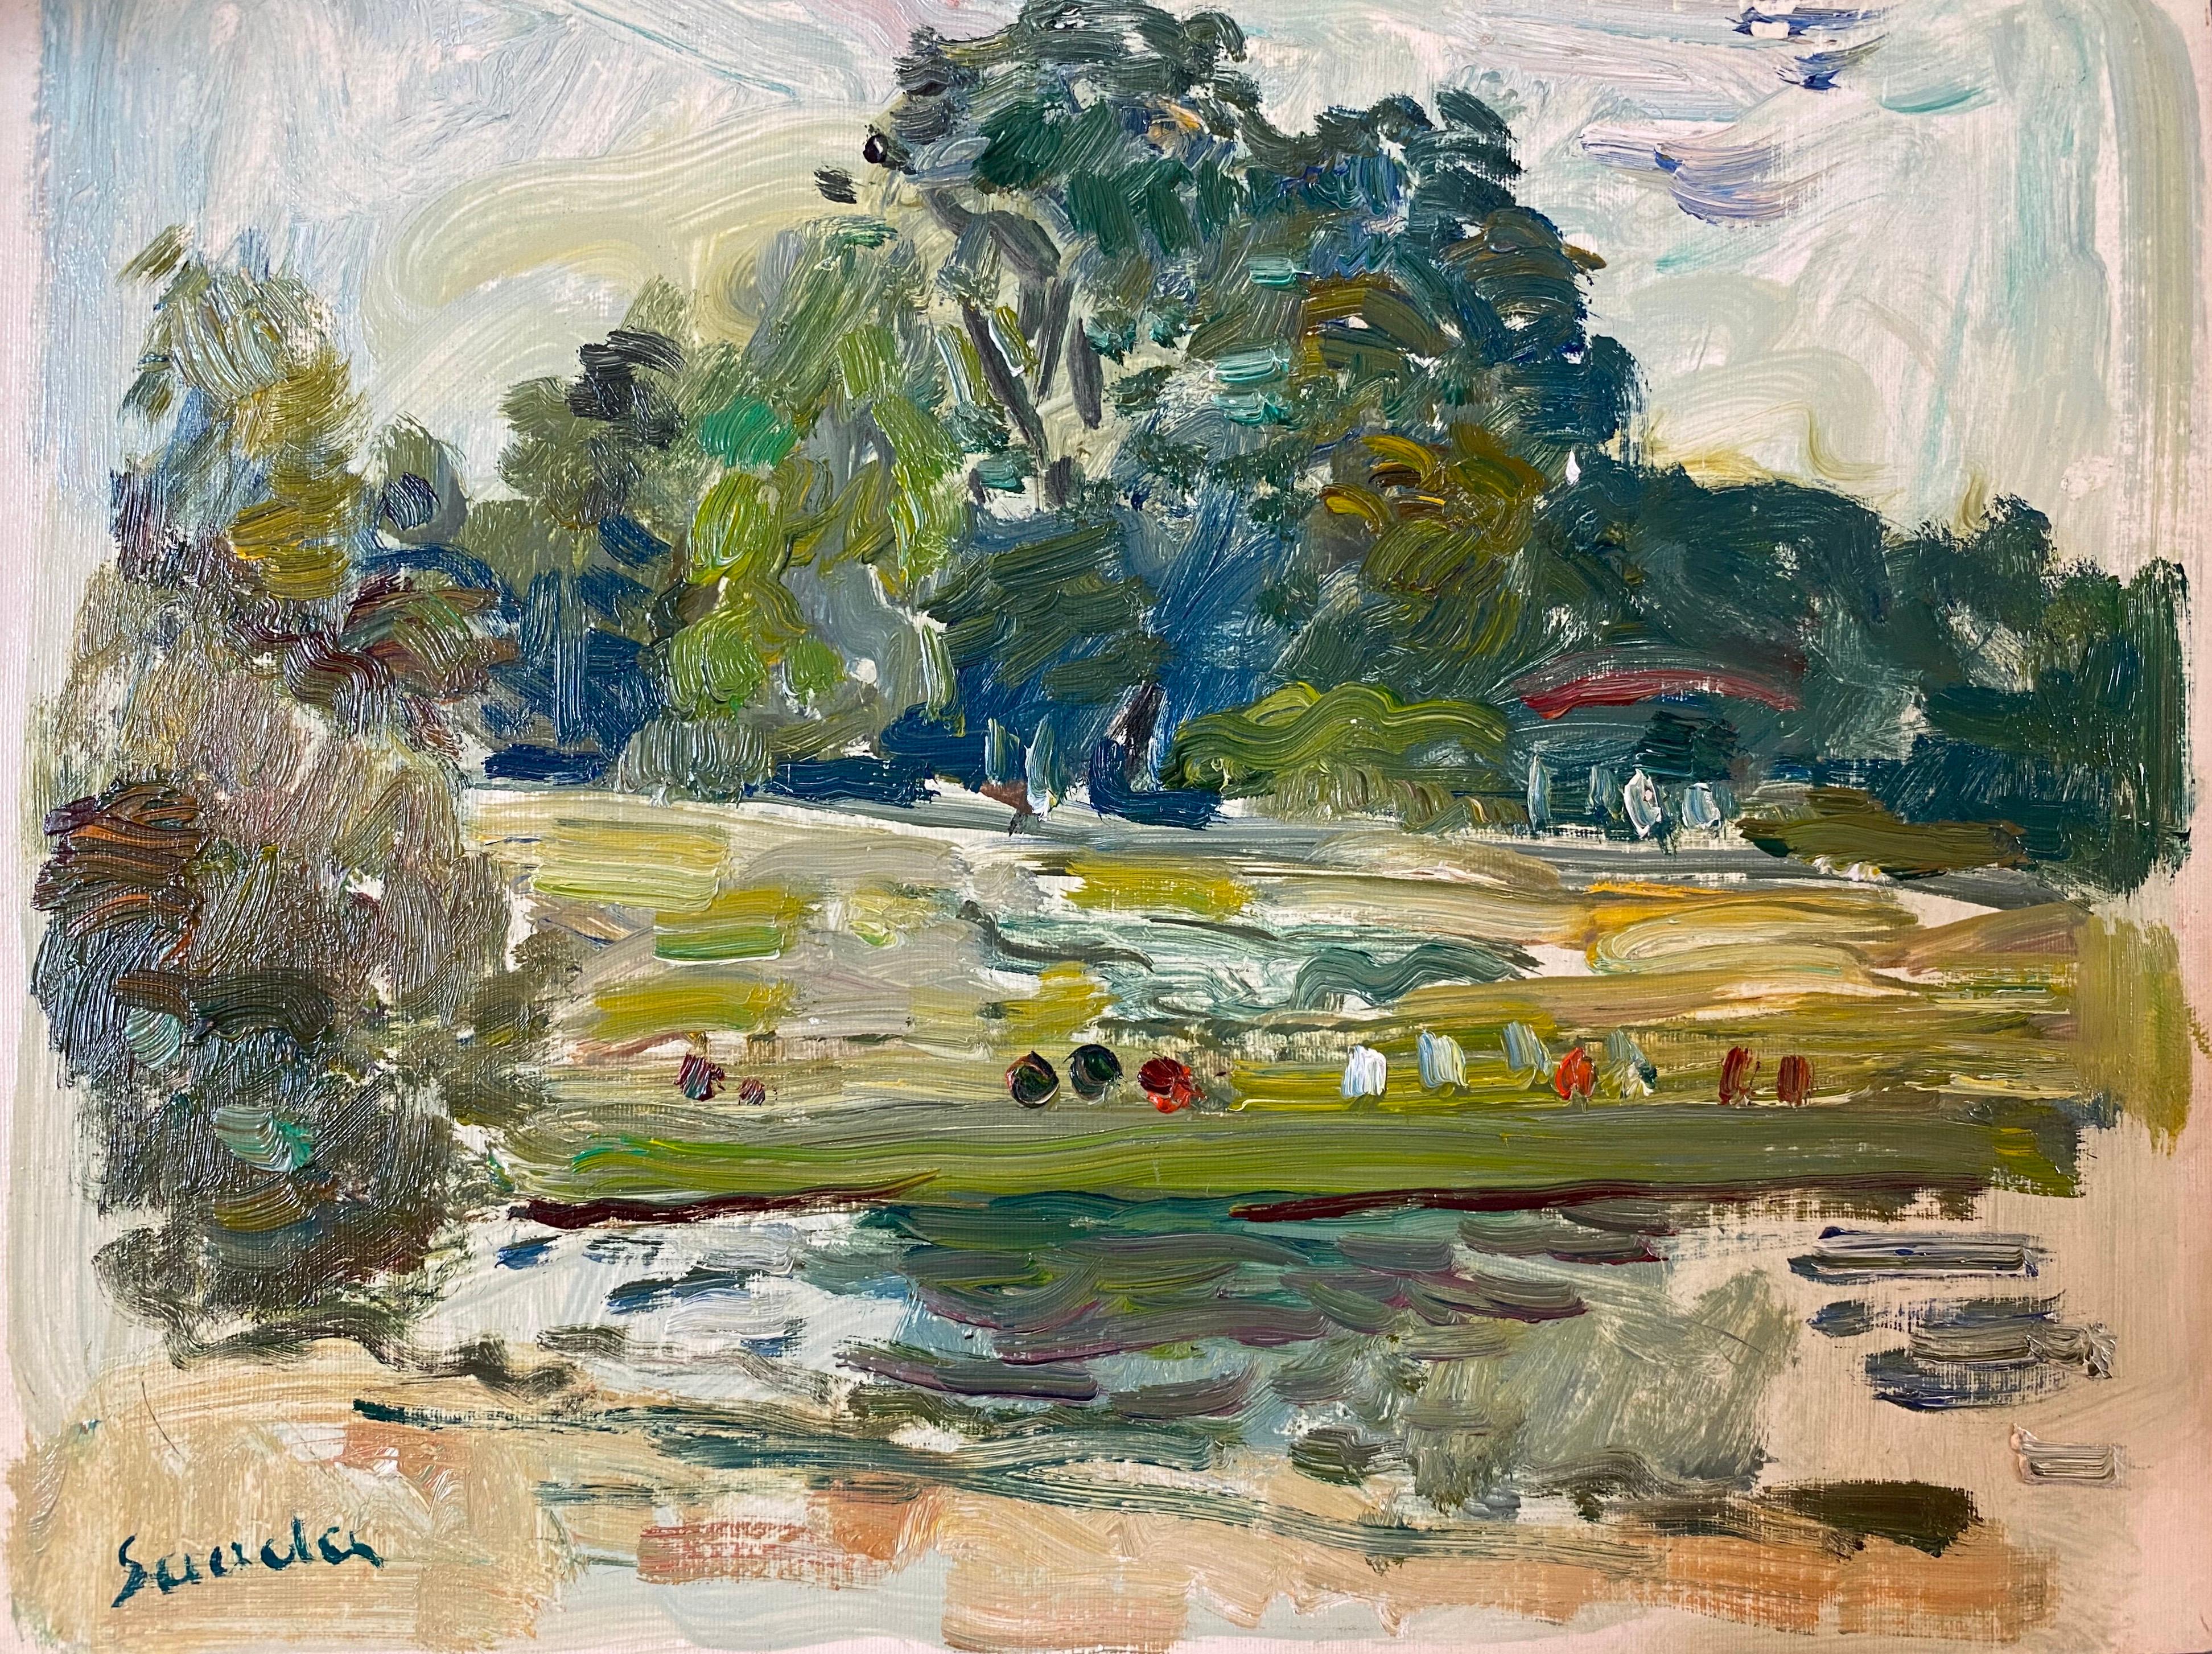 Sadda Landscape Painting - Figures in Park by Lake, French Impressionist Landscape, Signed Oil Painting